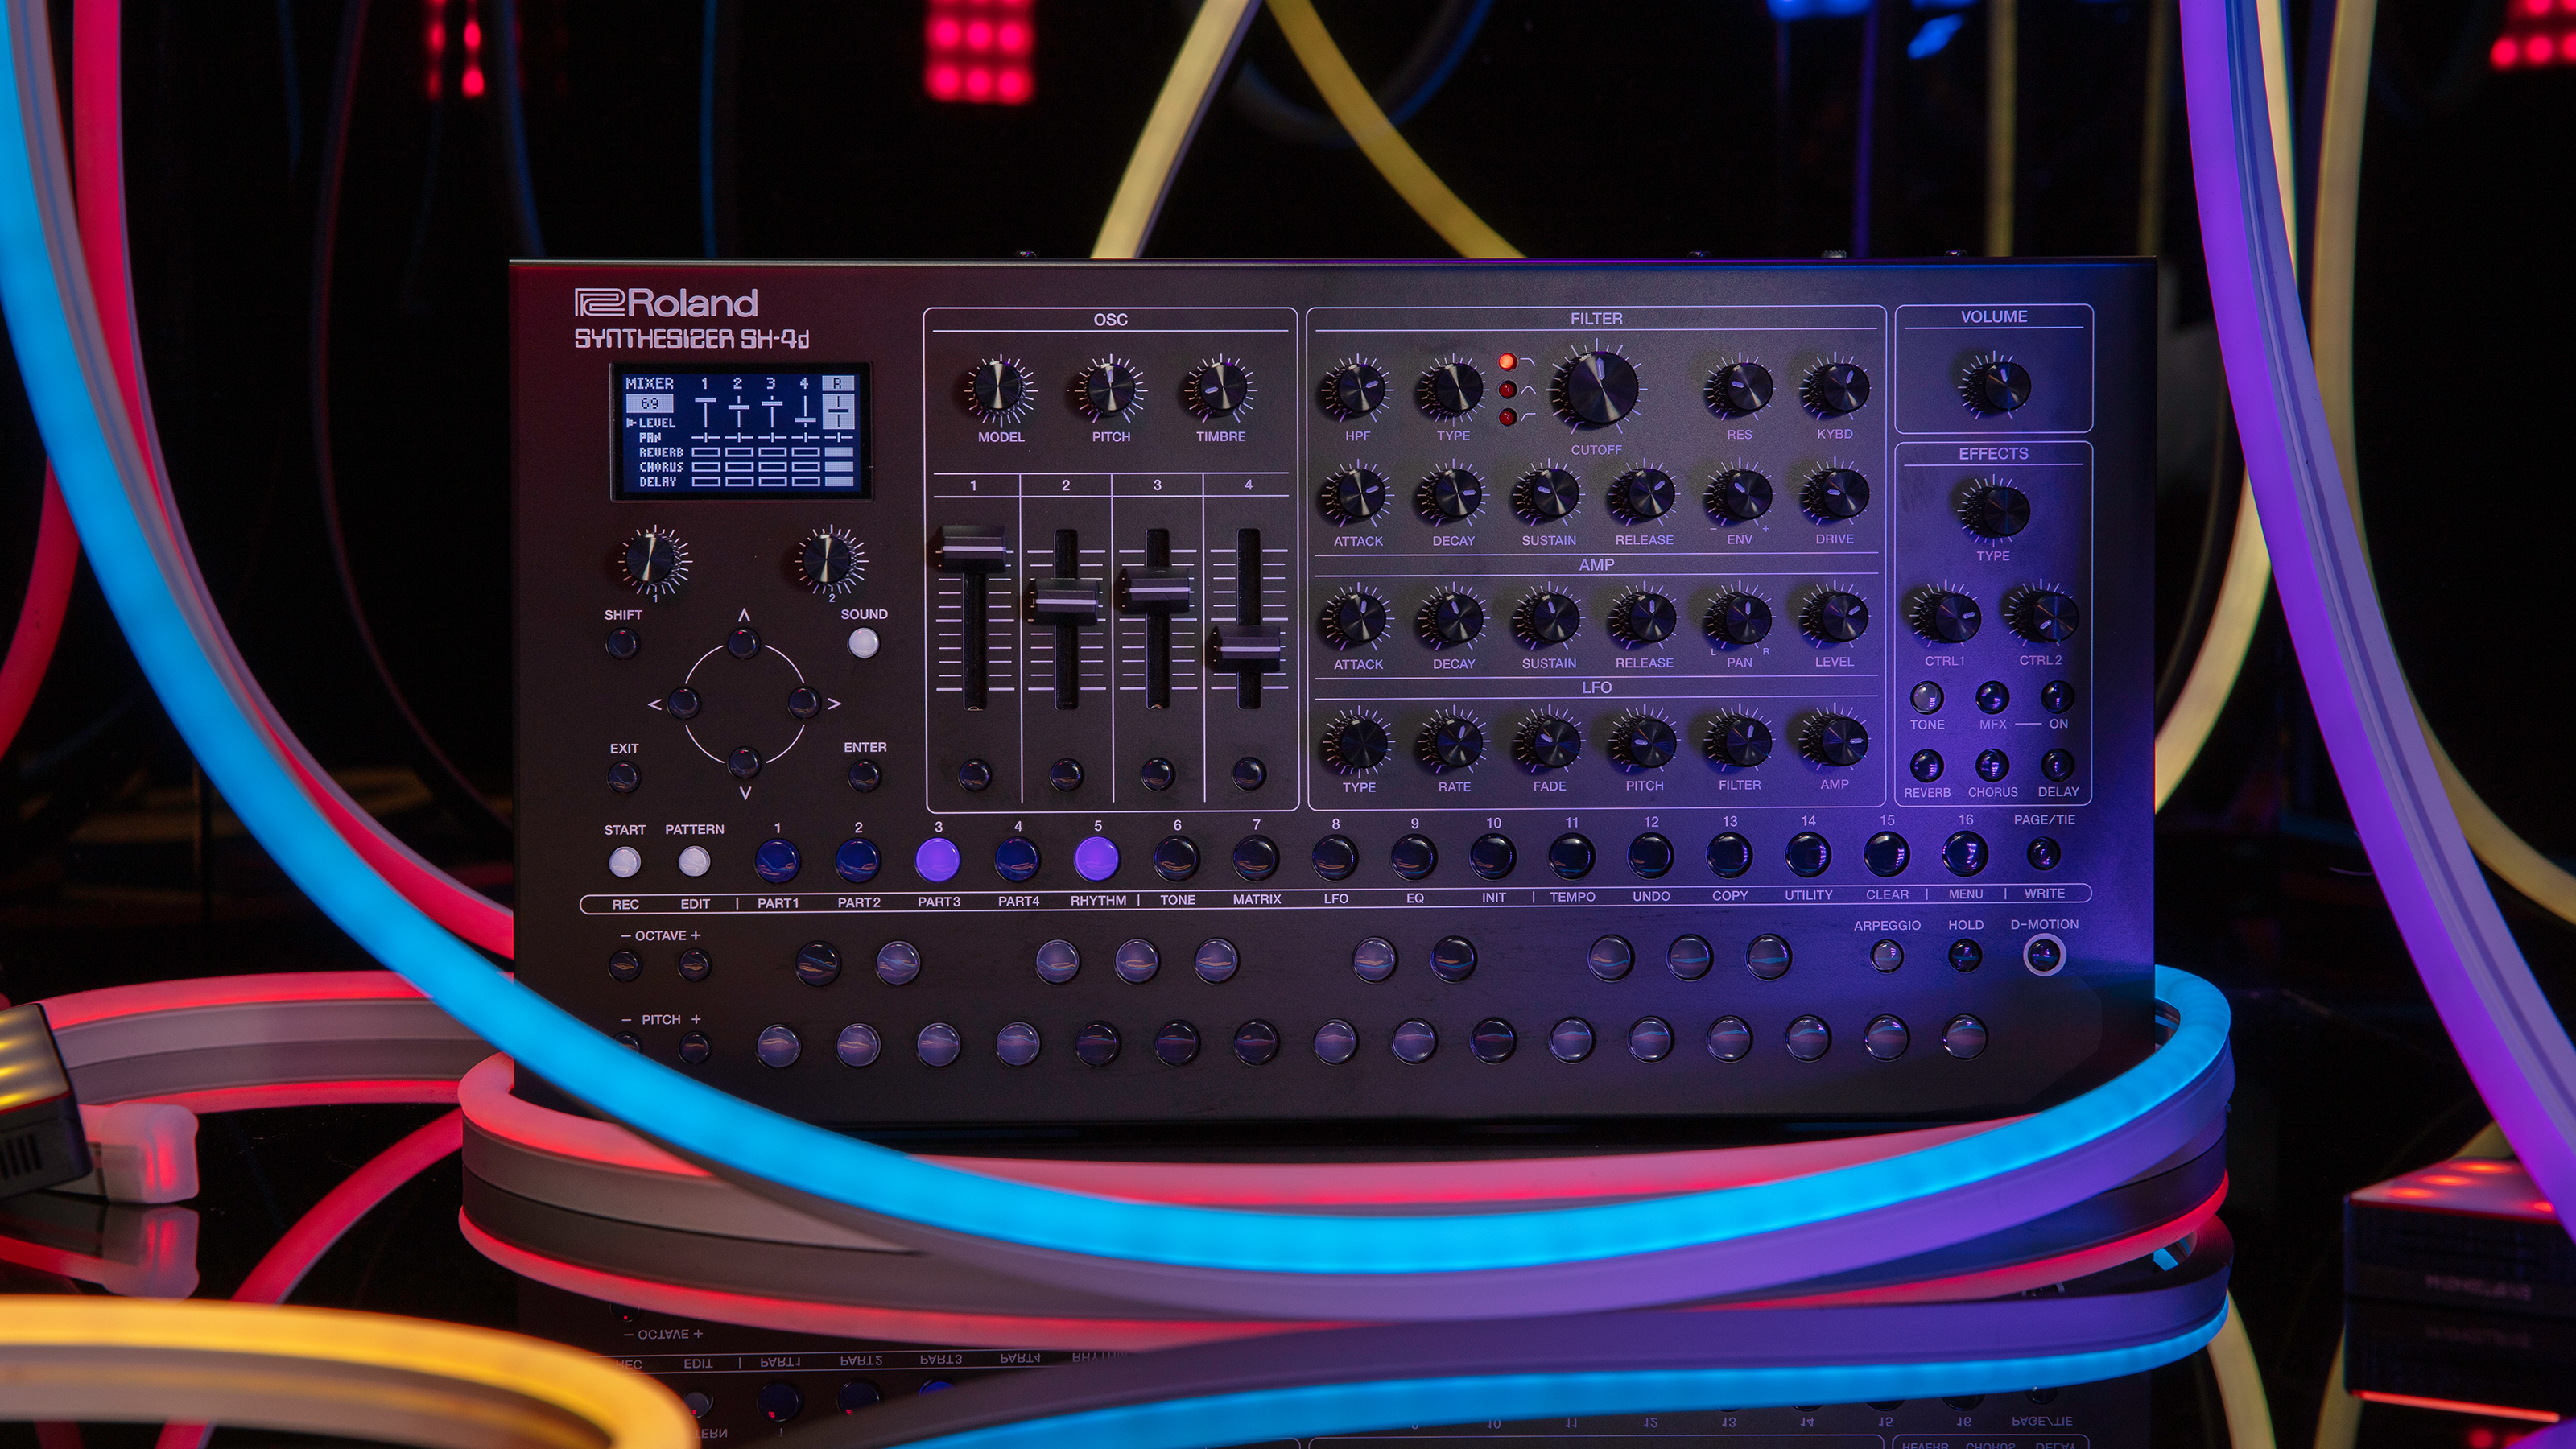 In Review: Roland SH-4d